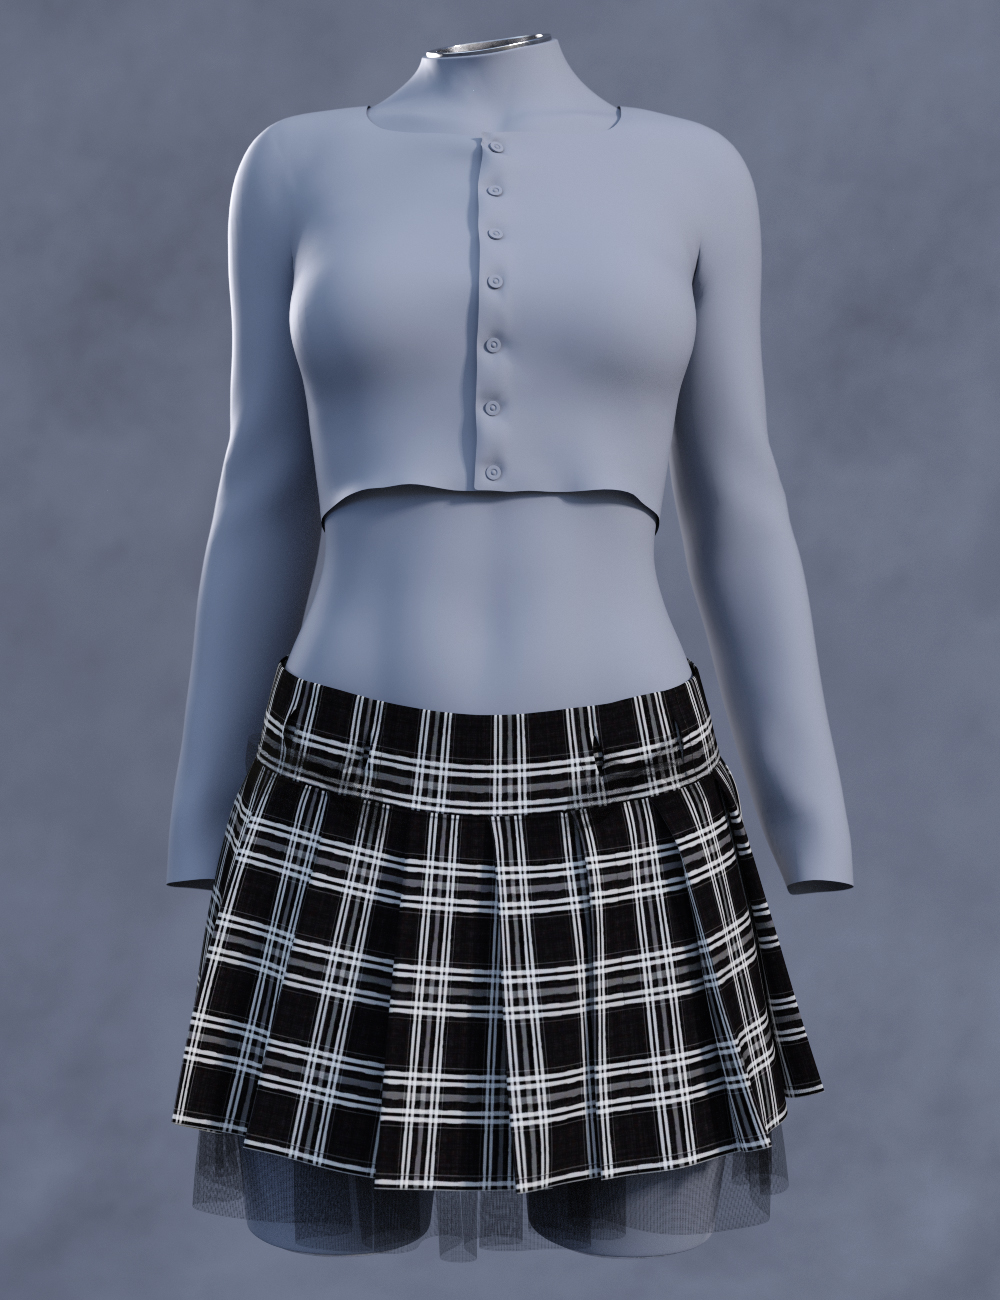 dForce GF Women's Wear Series One Ribbons Skirt for Genesis 8 and 8.1 Females by: Green Finger, 3D Models by Daz 3D